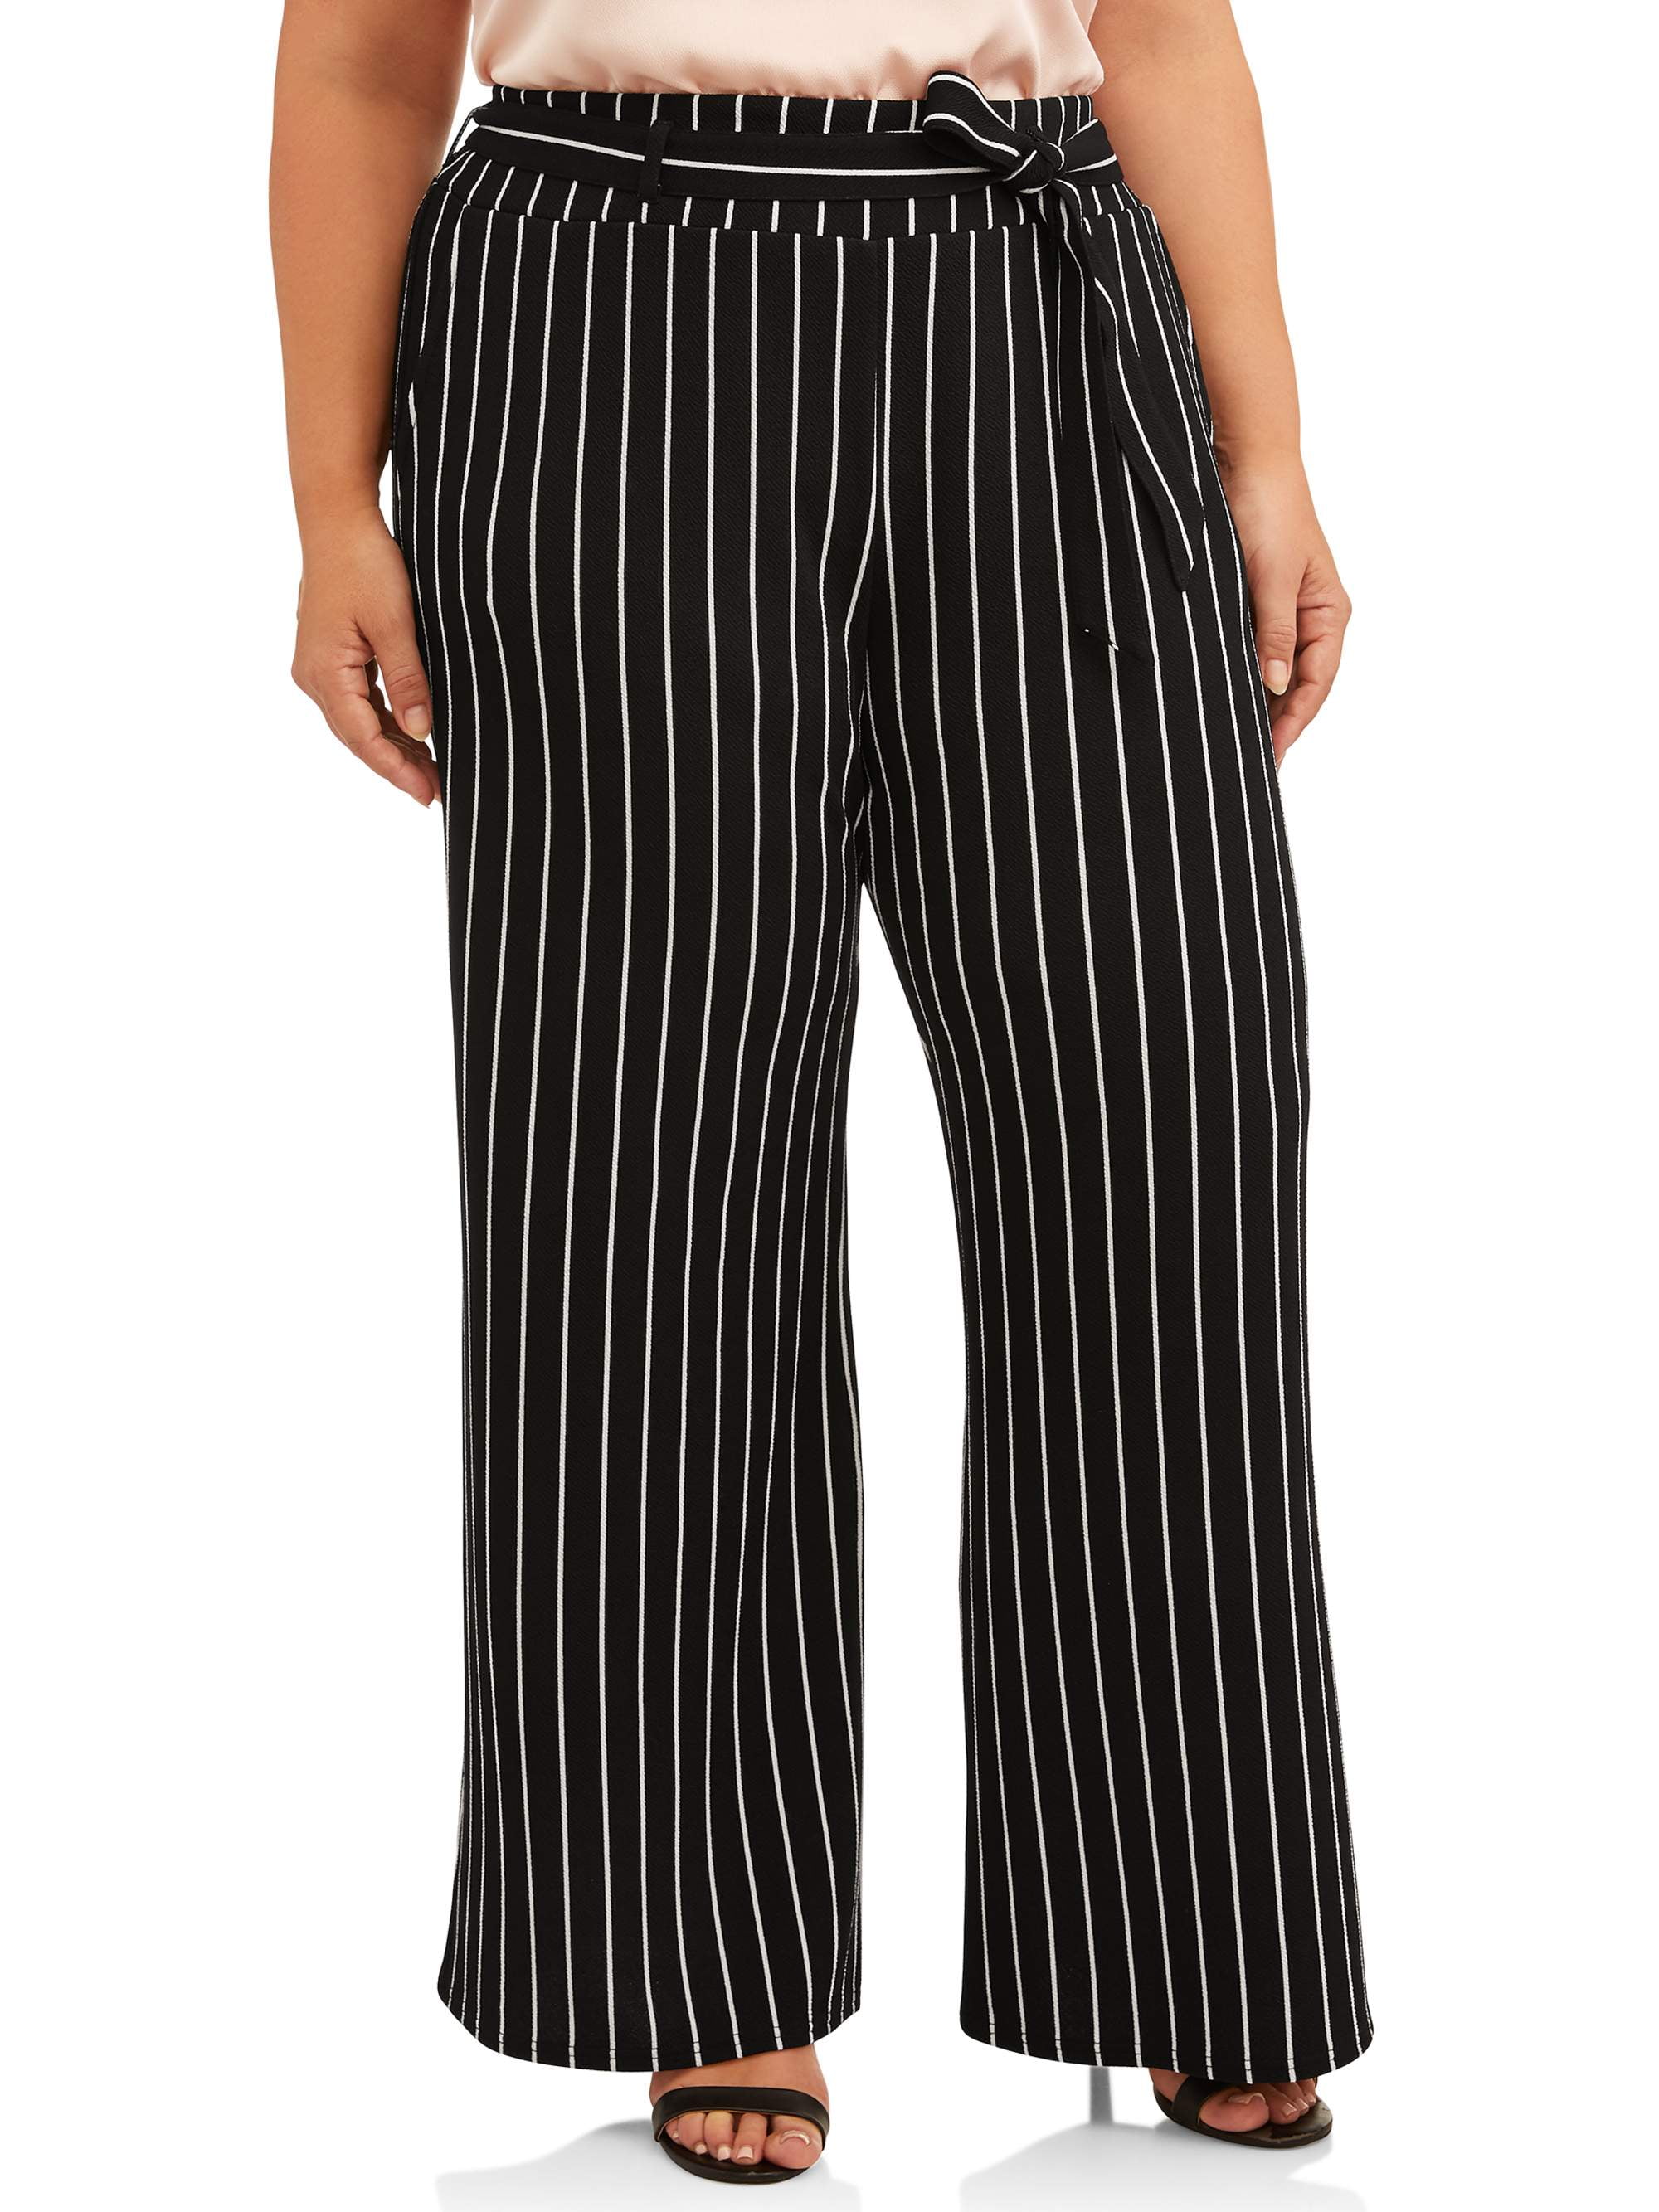 Plus Size Palazzo Pants for Women Striped High Split High Waisted Beach Wide  Leg Lounge Pants Trousers with Belt | Walmart Canada